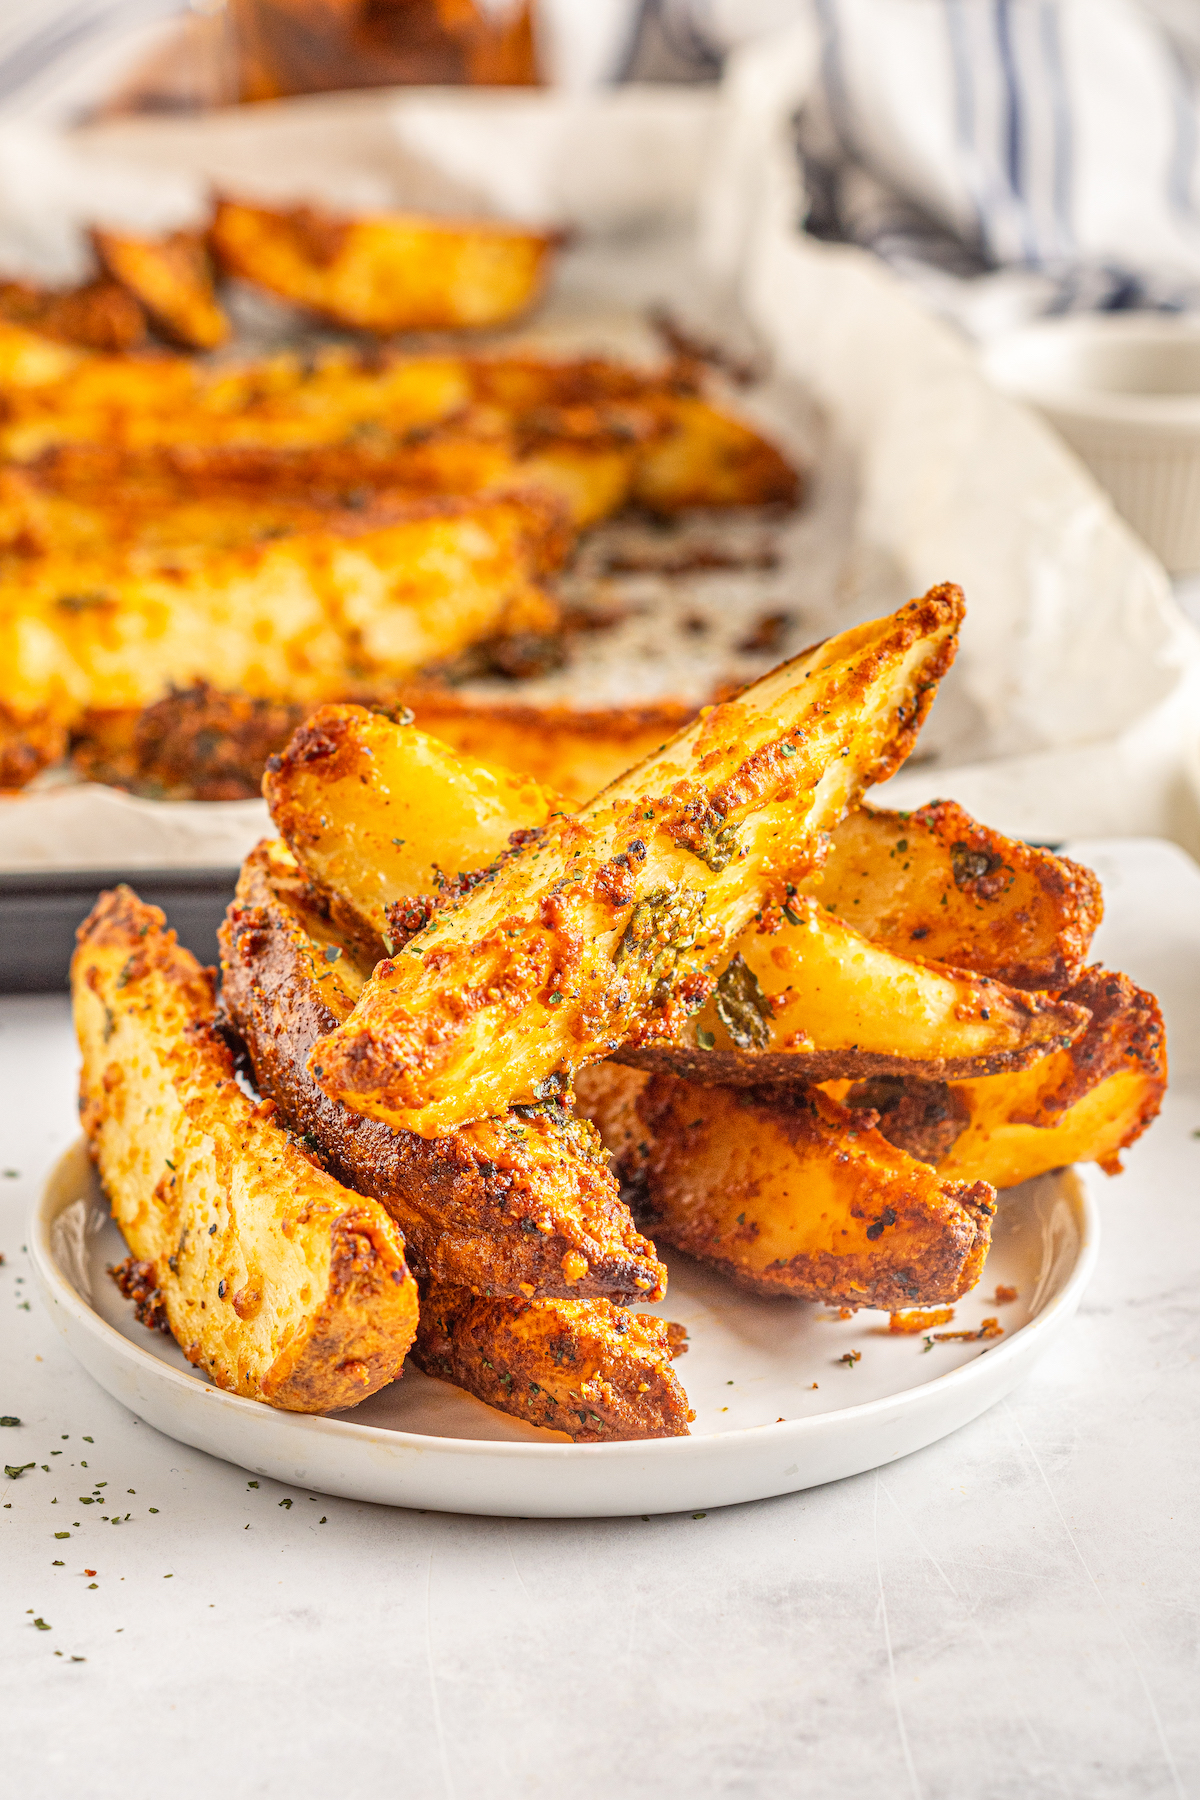 Potato wedges on a small plate.